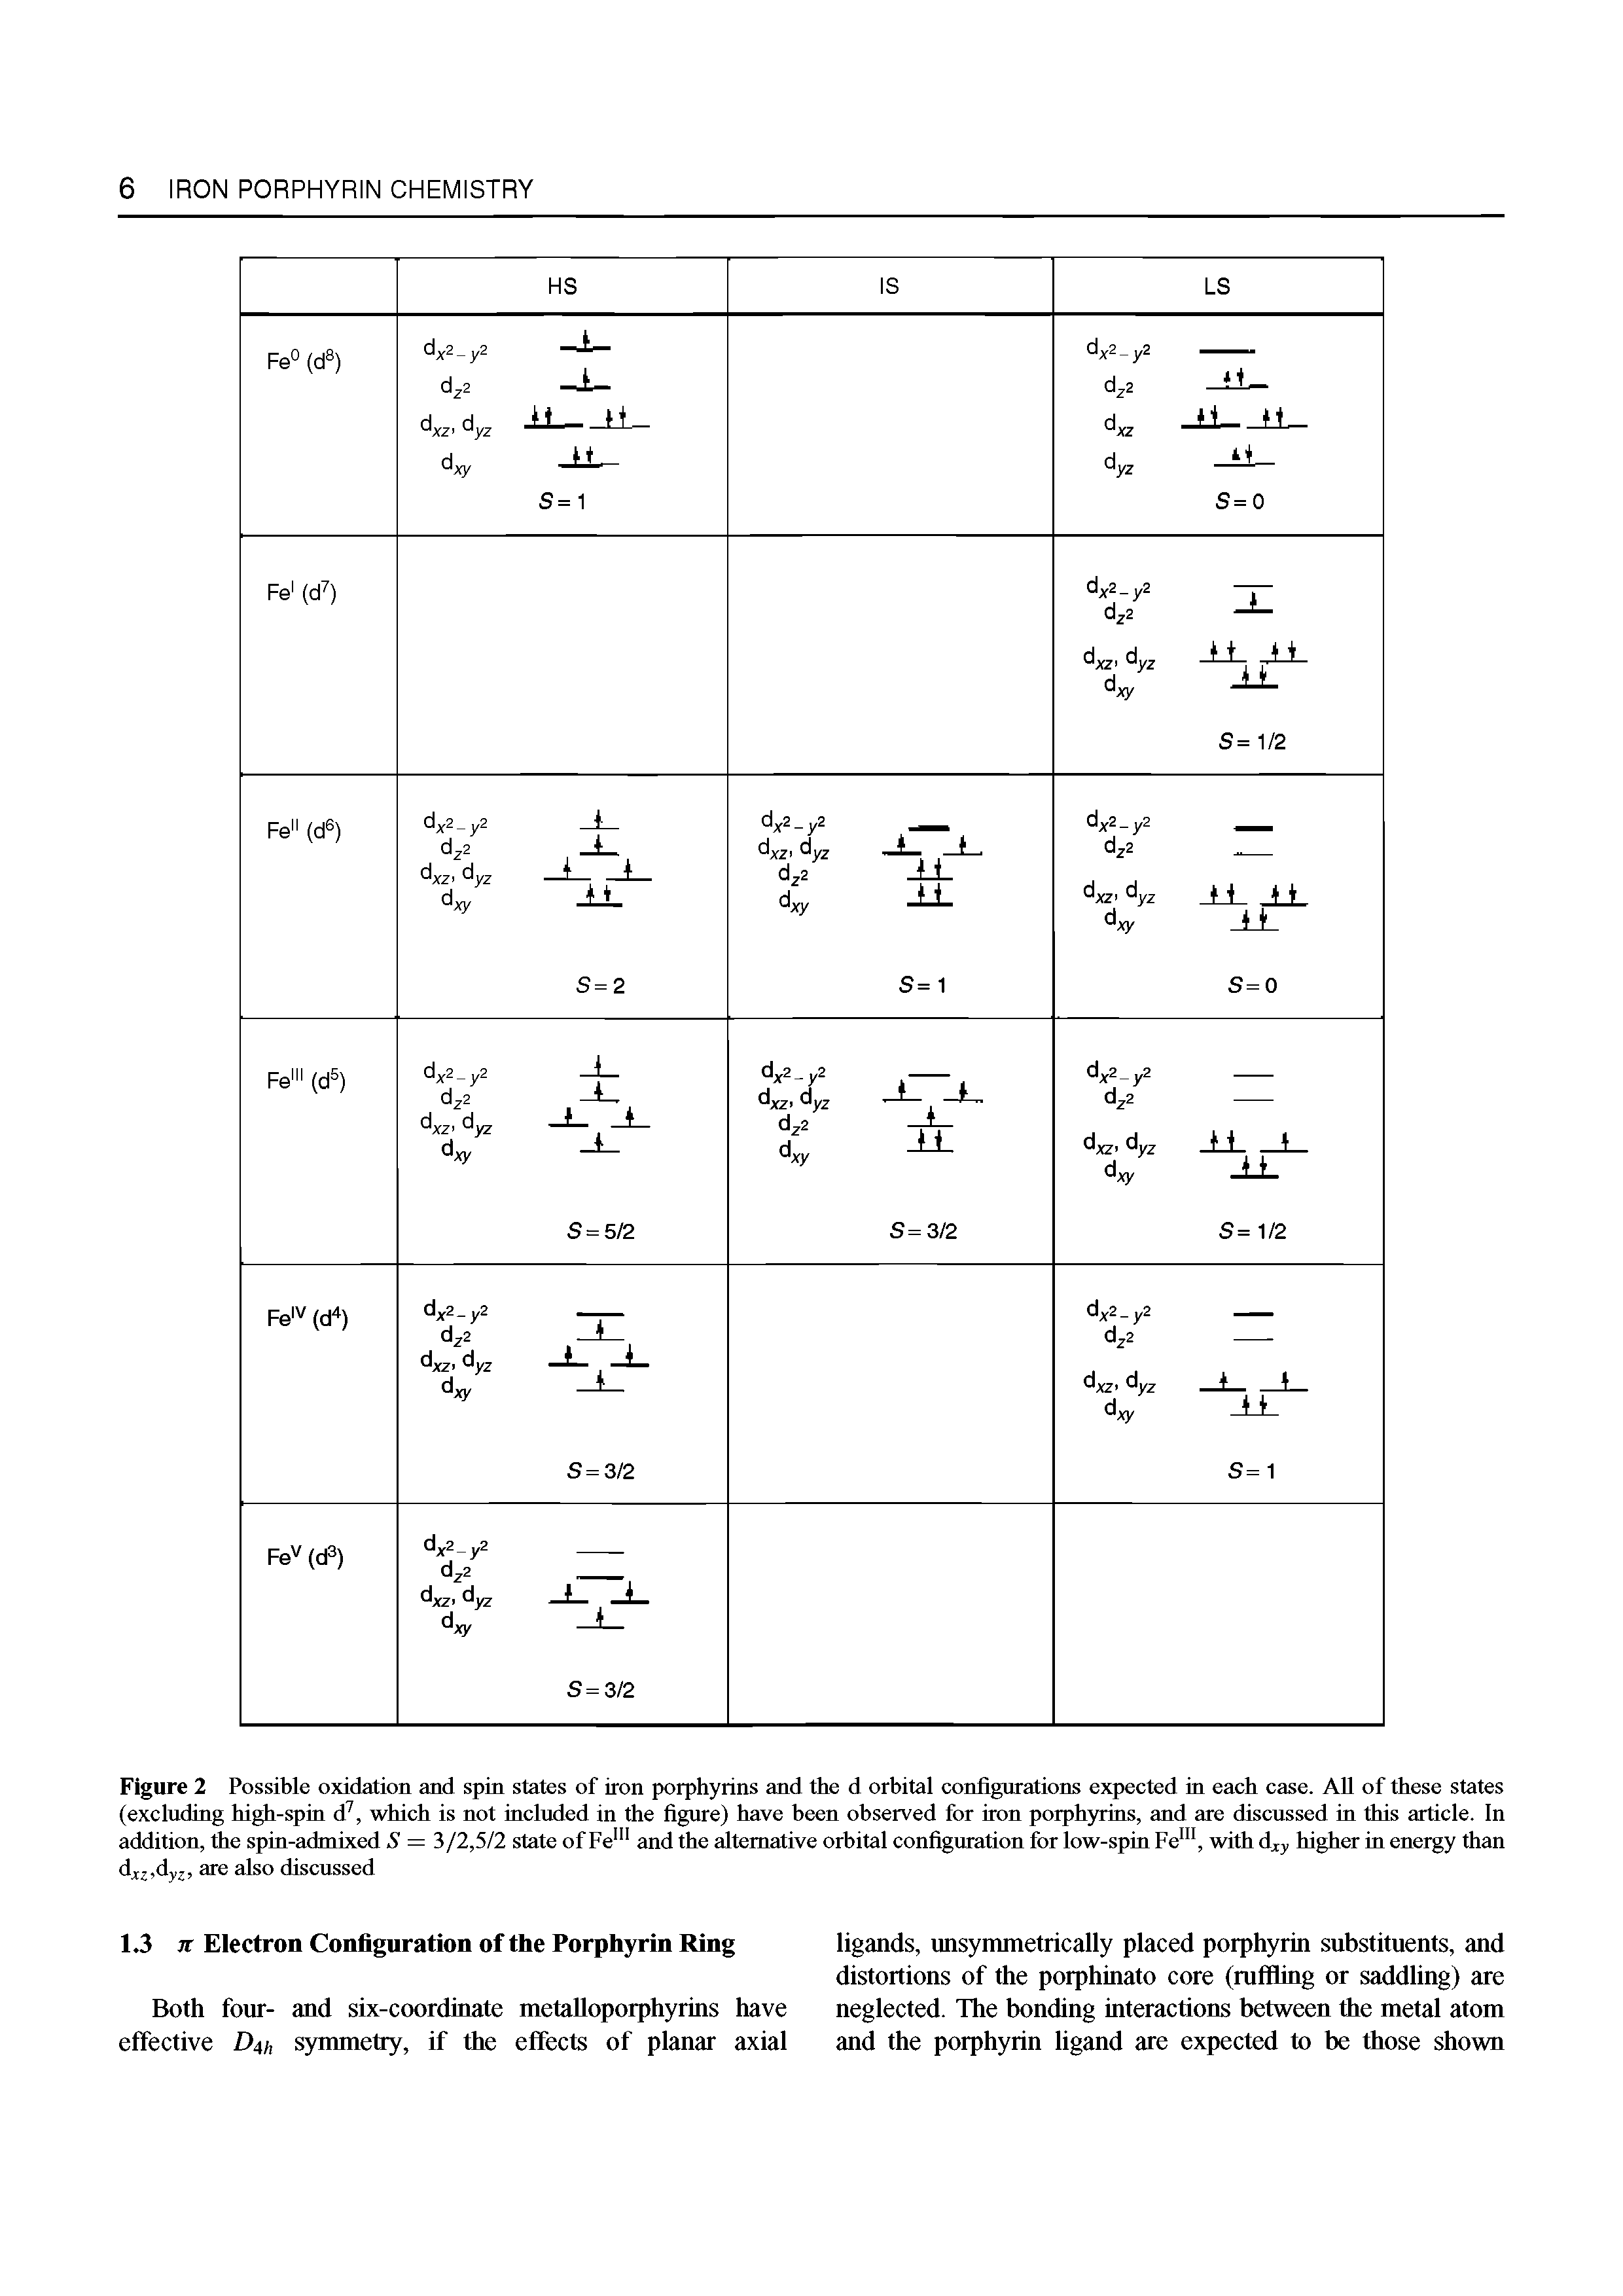 Figure 2 Possible oxidation and spin states of iron porphyrins and the d orbital configurations expected in each case. AU of these states (excluding high-spin d, which is not included in the figure) have been observed for iron porphyrins, and are discussed in this article. In addition, the spin-admixed 5 = 3/2,5/2 state of Fe " and the alternative orbital configuration for low-spin Fe , with dxy higher in energy than dxi,dyz are also discussed...